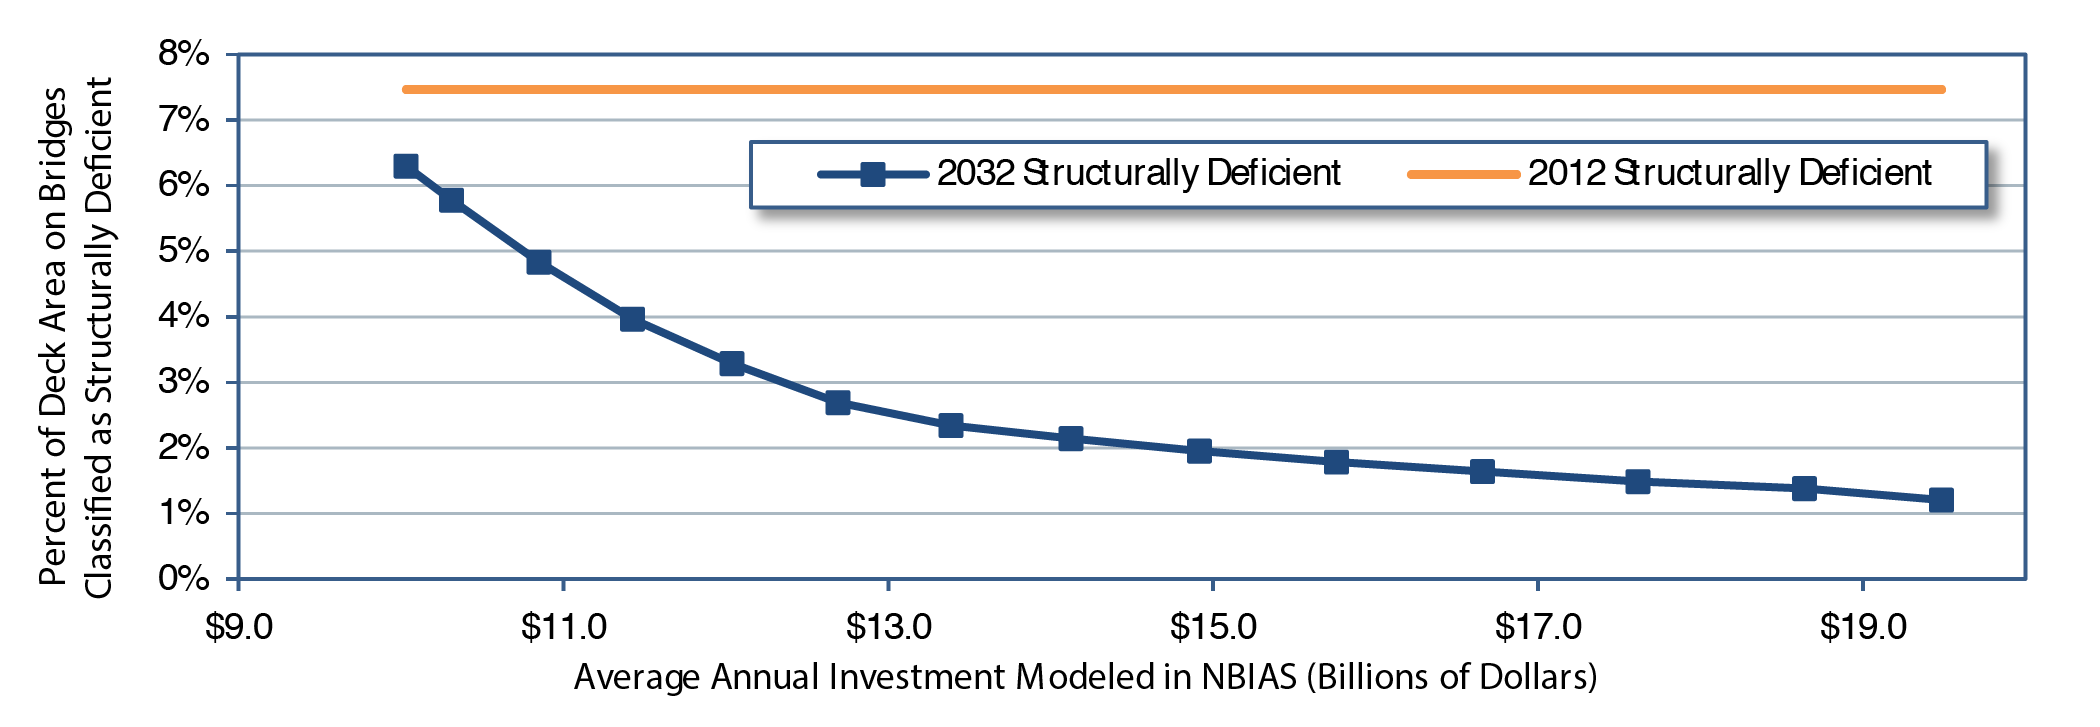 A line graph plots values for percent of deck area on bridges classified as structurally deficient over average annual investment in billions of year 2012 dollars modeled in NBIAS for 2012 and 2032. While the line for 2012 structurally deficient bridges remains at about 7.5 percent from $10.0 billion to $19.5 billion, the plot for 2032 structurally deficient bridges has an initial value of 6.3 percent at an annual investment of $10.0 billion and curves smoothly downward to a value of 3.3 percent at an annual investment of $12.0 billion. Continuing downward, the plot reaches a value of 2.0 percent at an annual investment of $14.9 billion, ending at a value of 1.2 percent at an annual investment of $19.5 billion. Source: National Bridge Investment Analysis System.